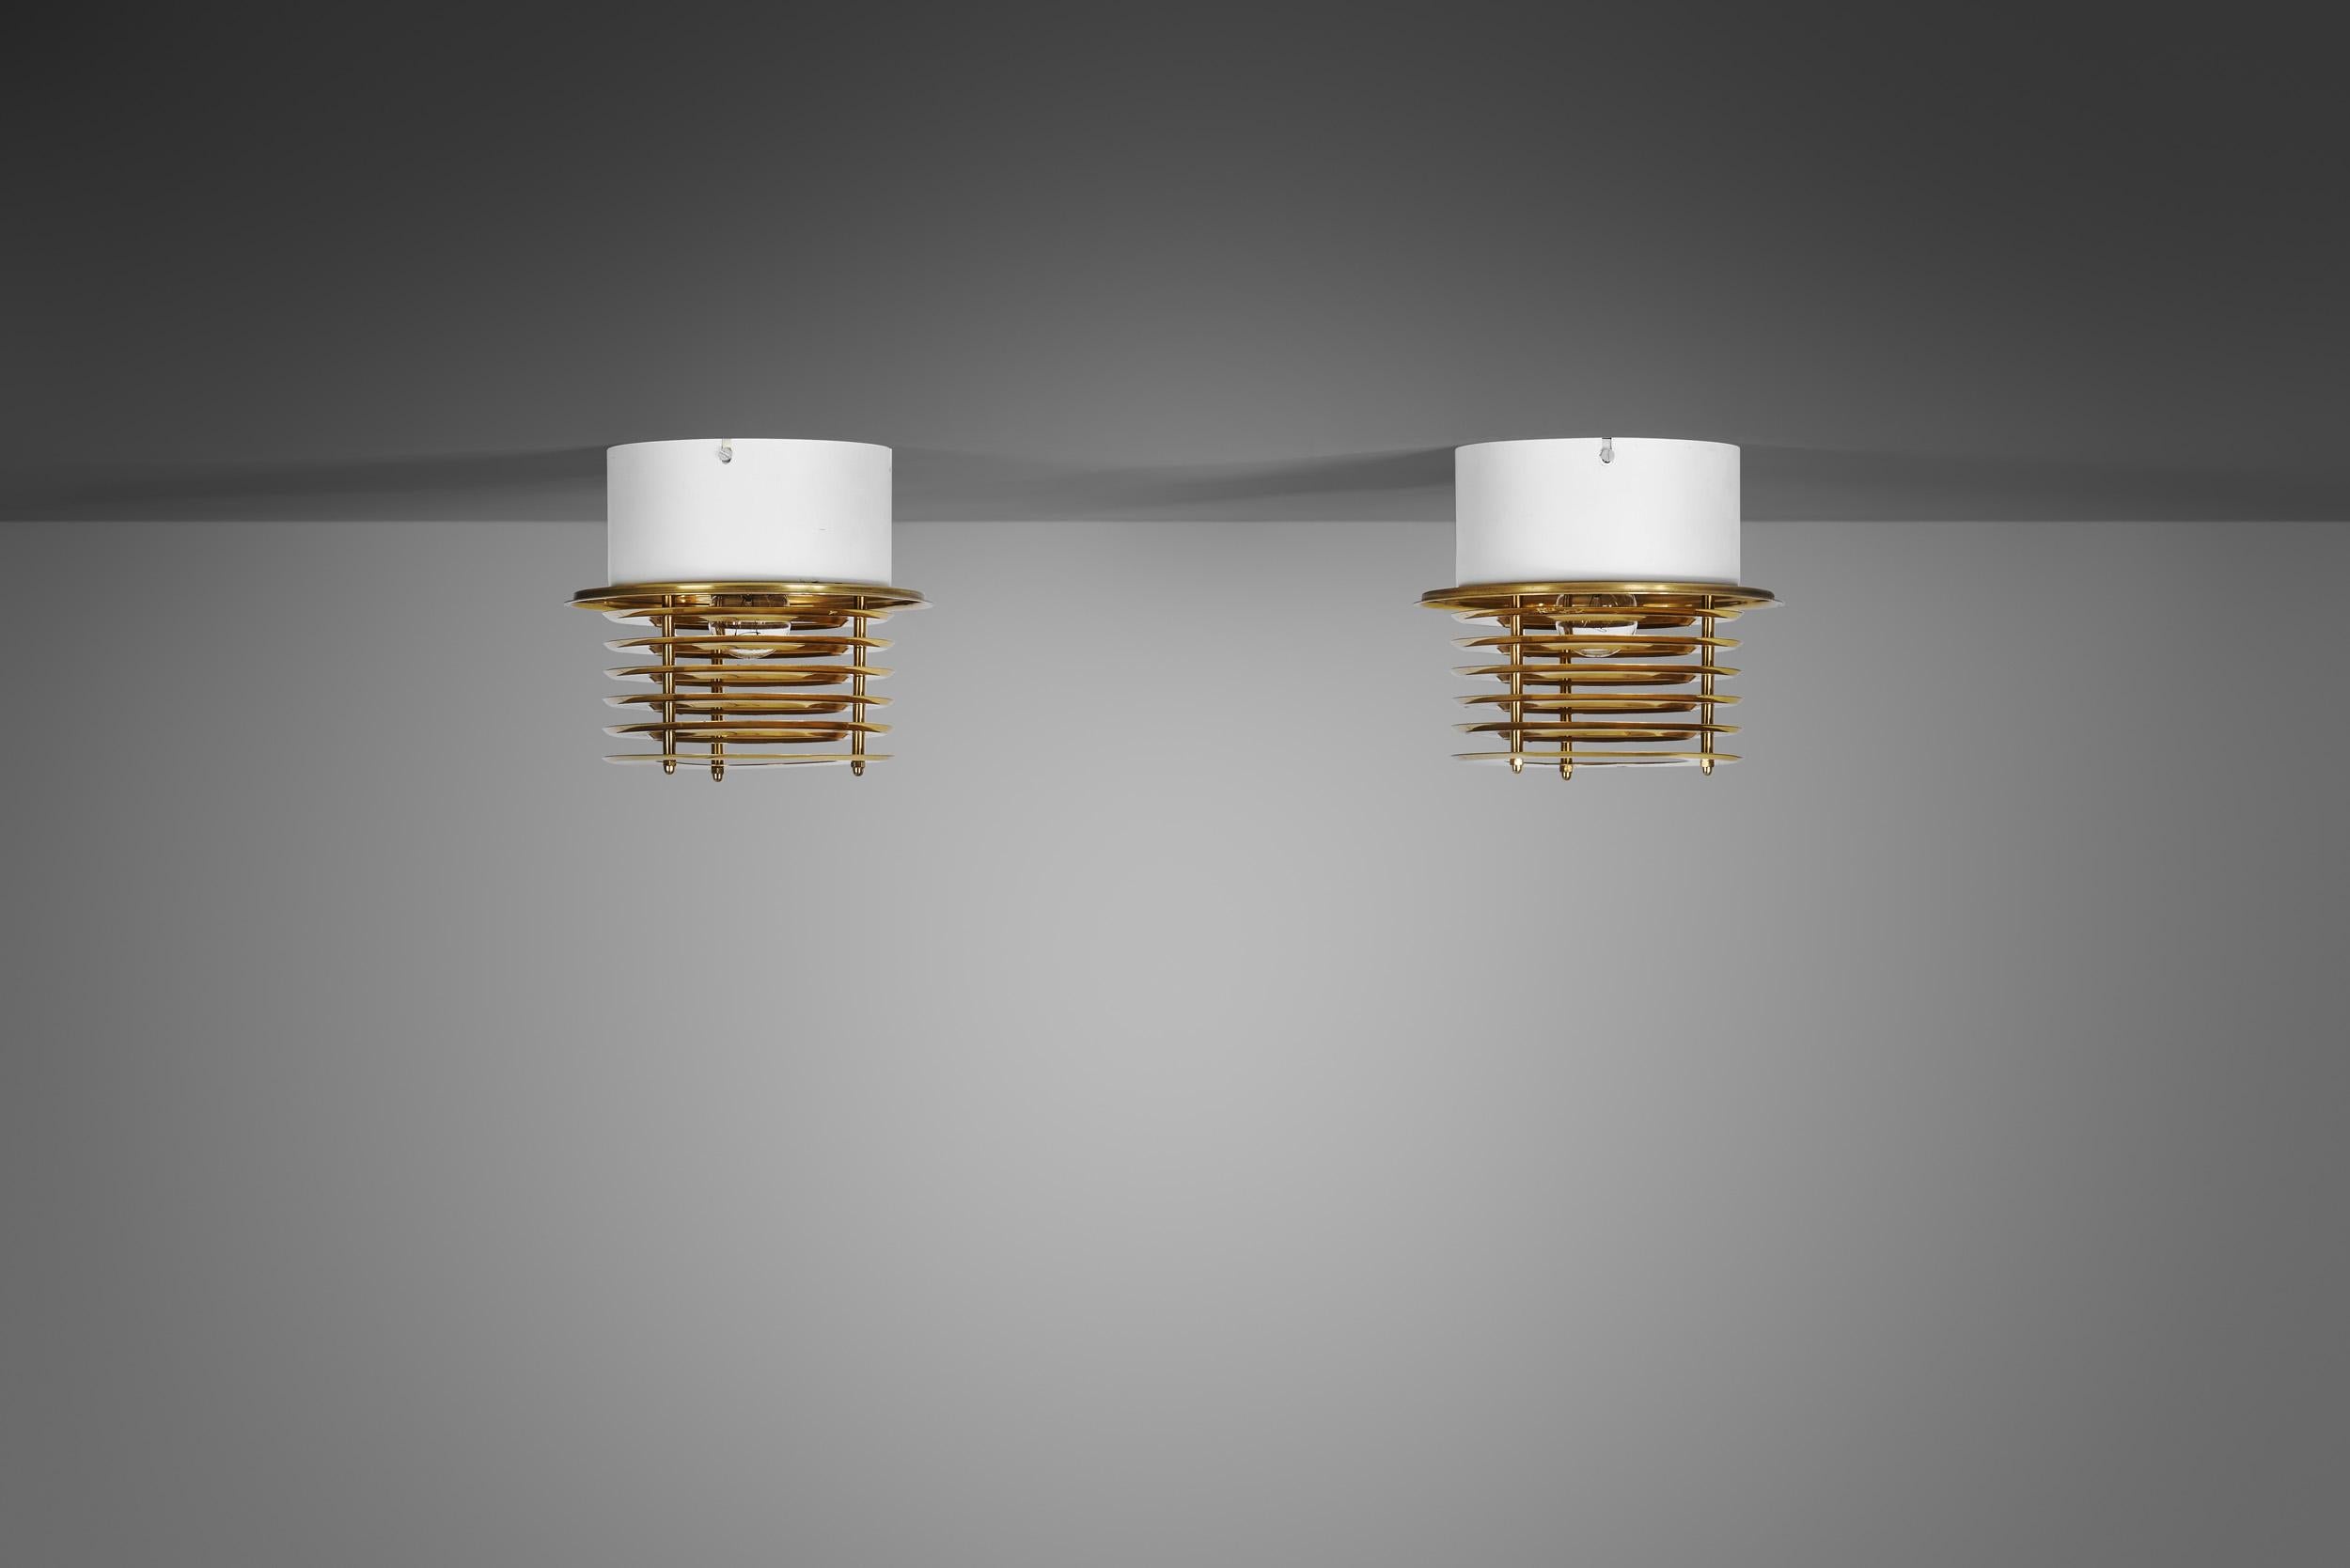 Mid-Century Modern Brass and Metal Ceiling Lamps by Taiba-Falkenberg Belysnin, Sweden 1960s For Sale